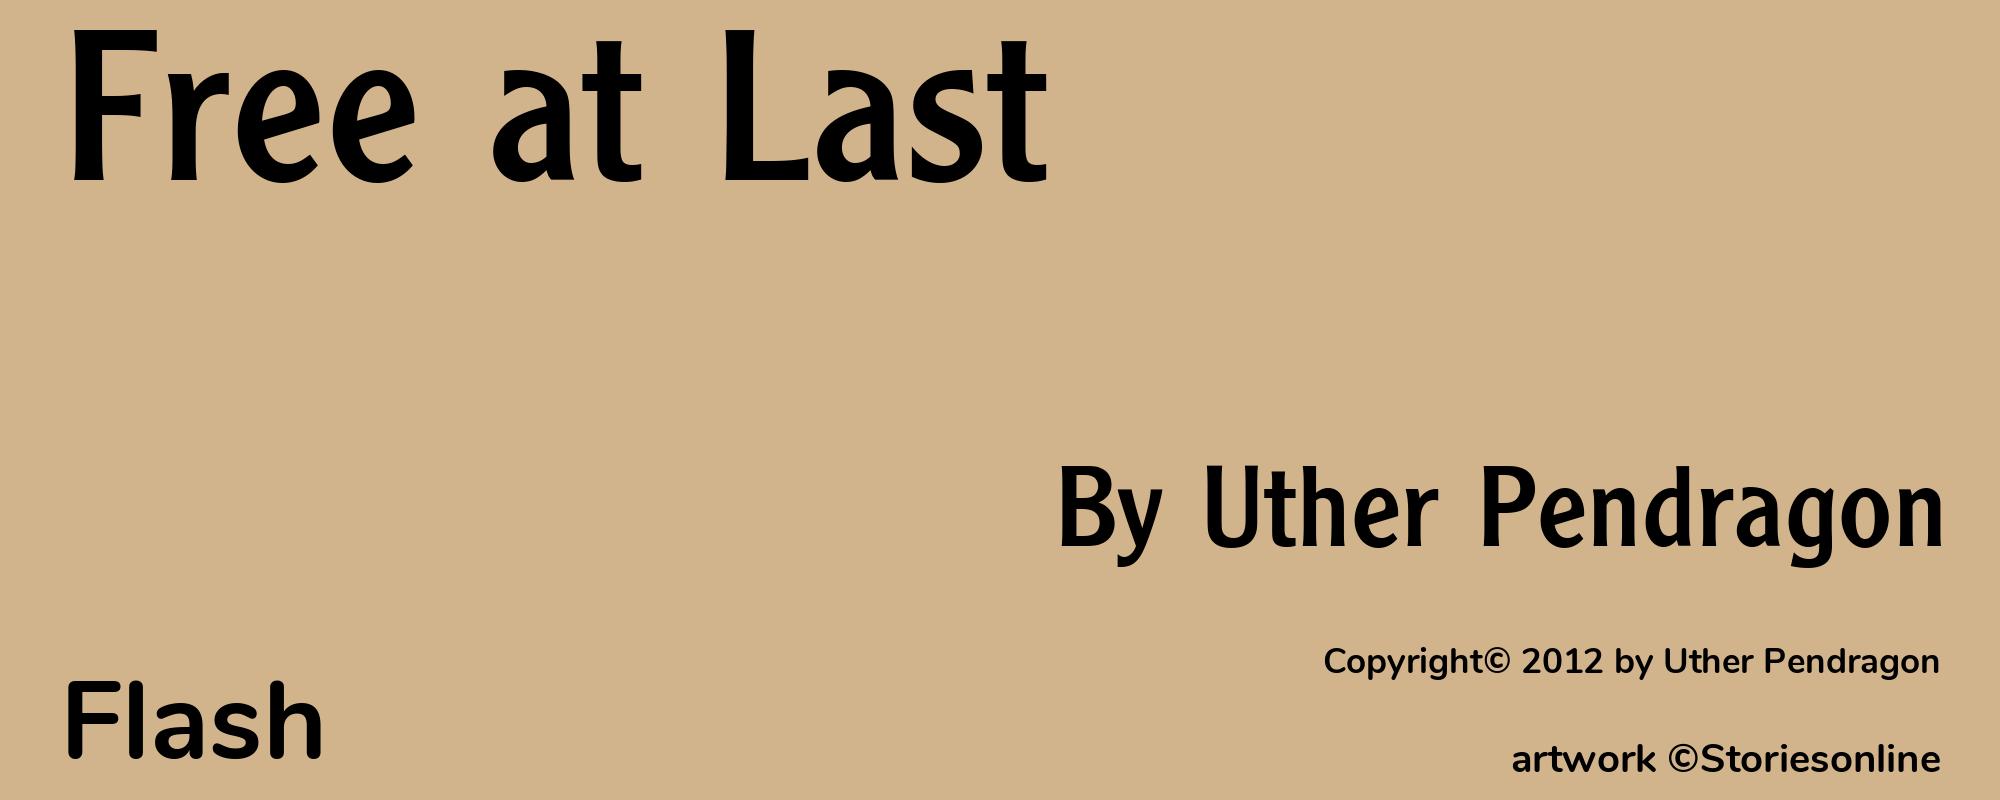 Free at Last - Cover